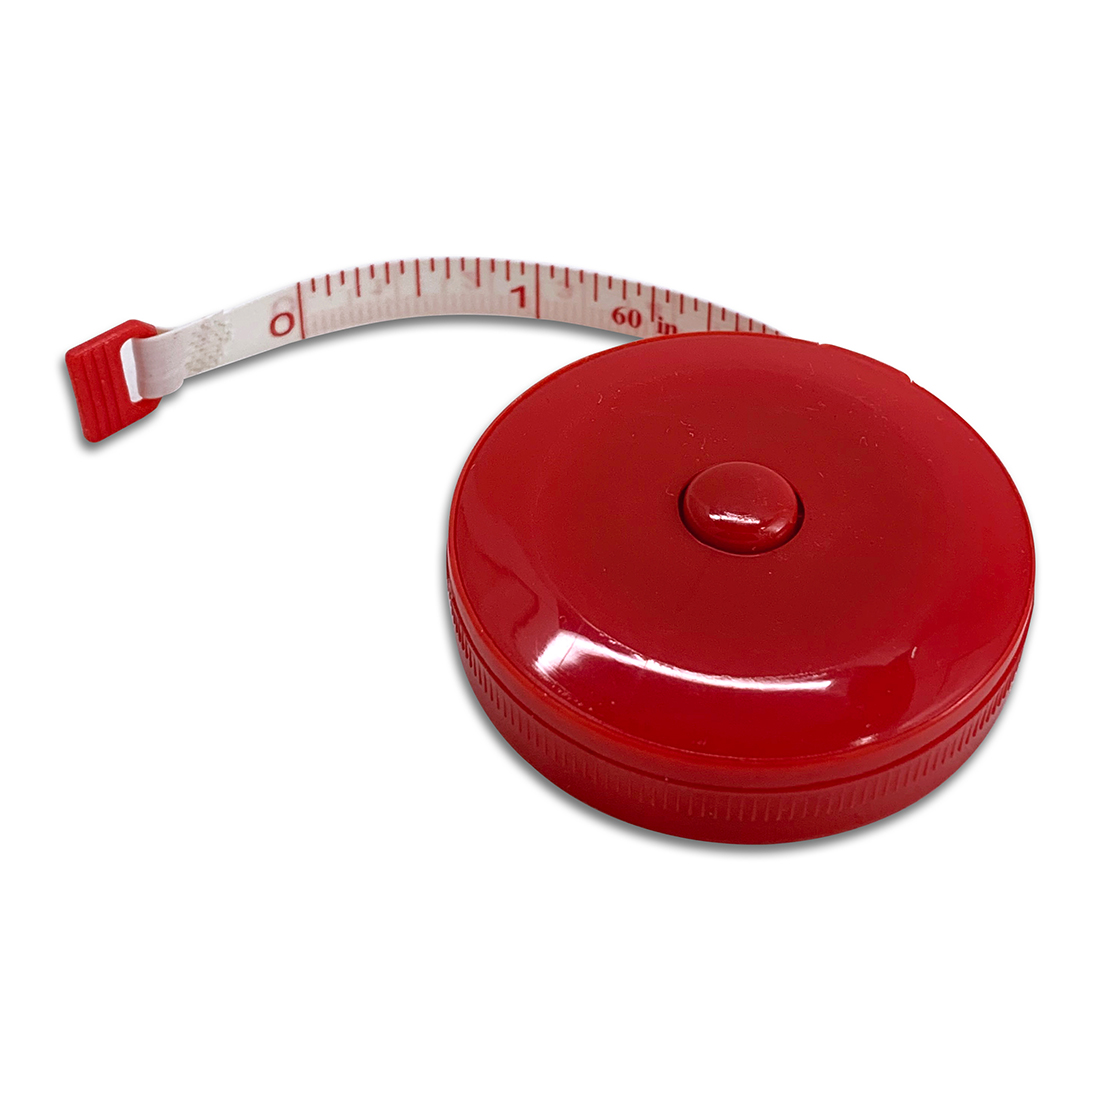 Wrap 'N Stay Retractable Tape Measure - 60 - Metric/Inches - WAWAK Sewing  Supplies